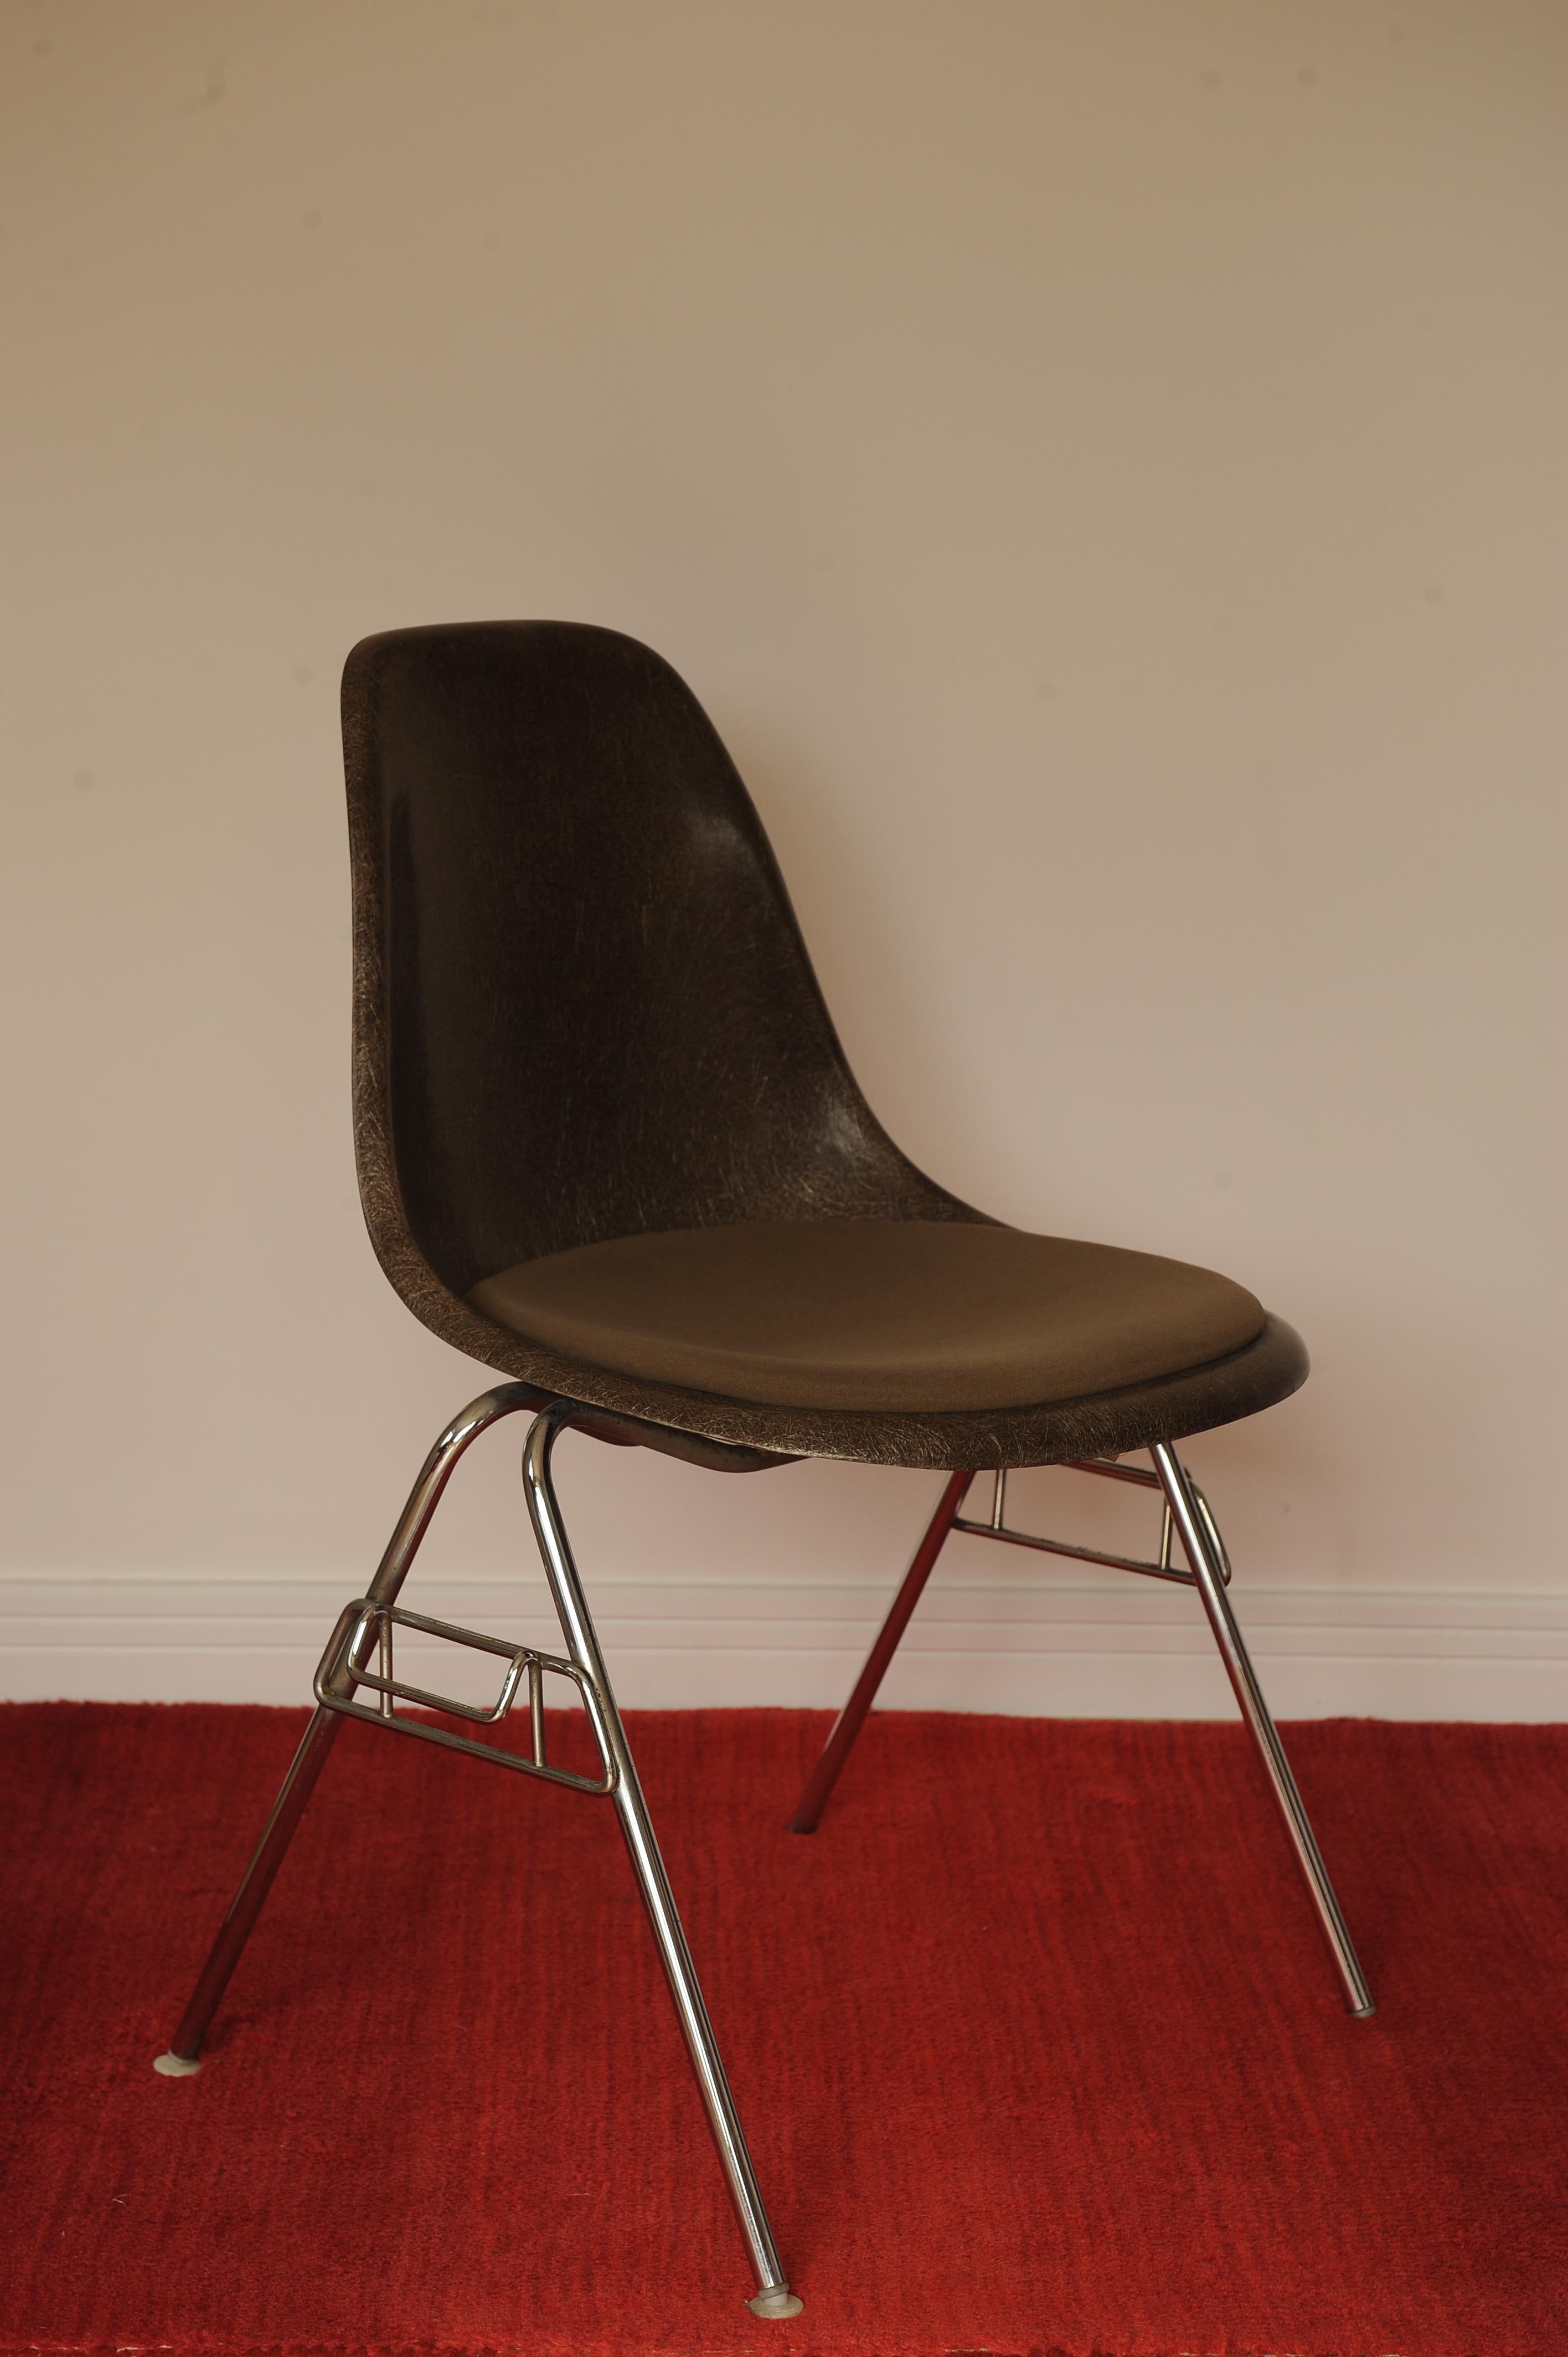 American Charles & Ray Eames Herman Miller Original DSS Fiberglass Chrome Stacking Chair For Sale